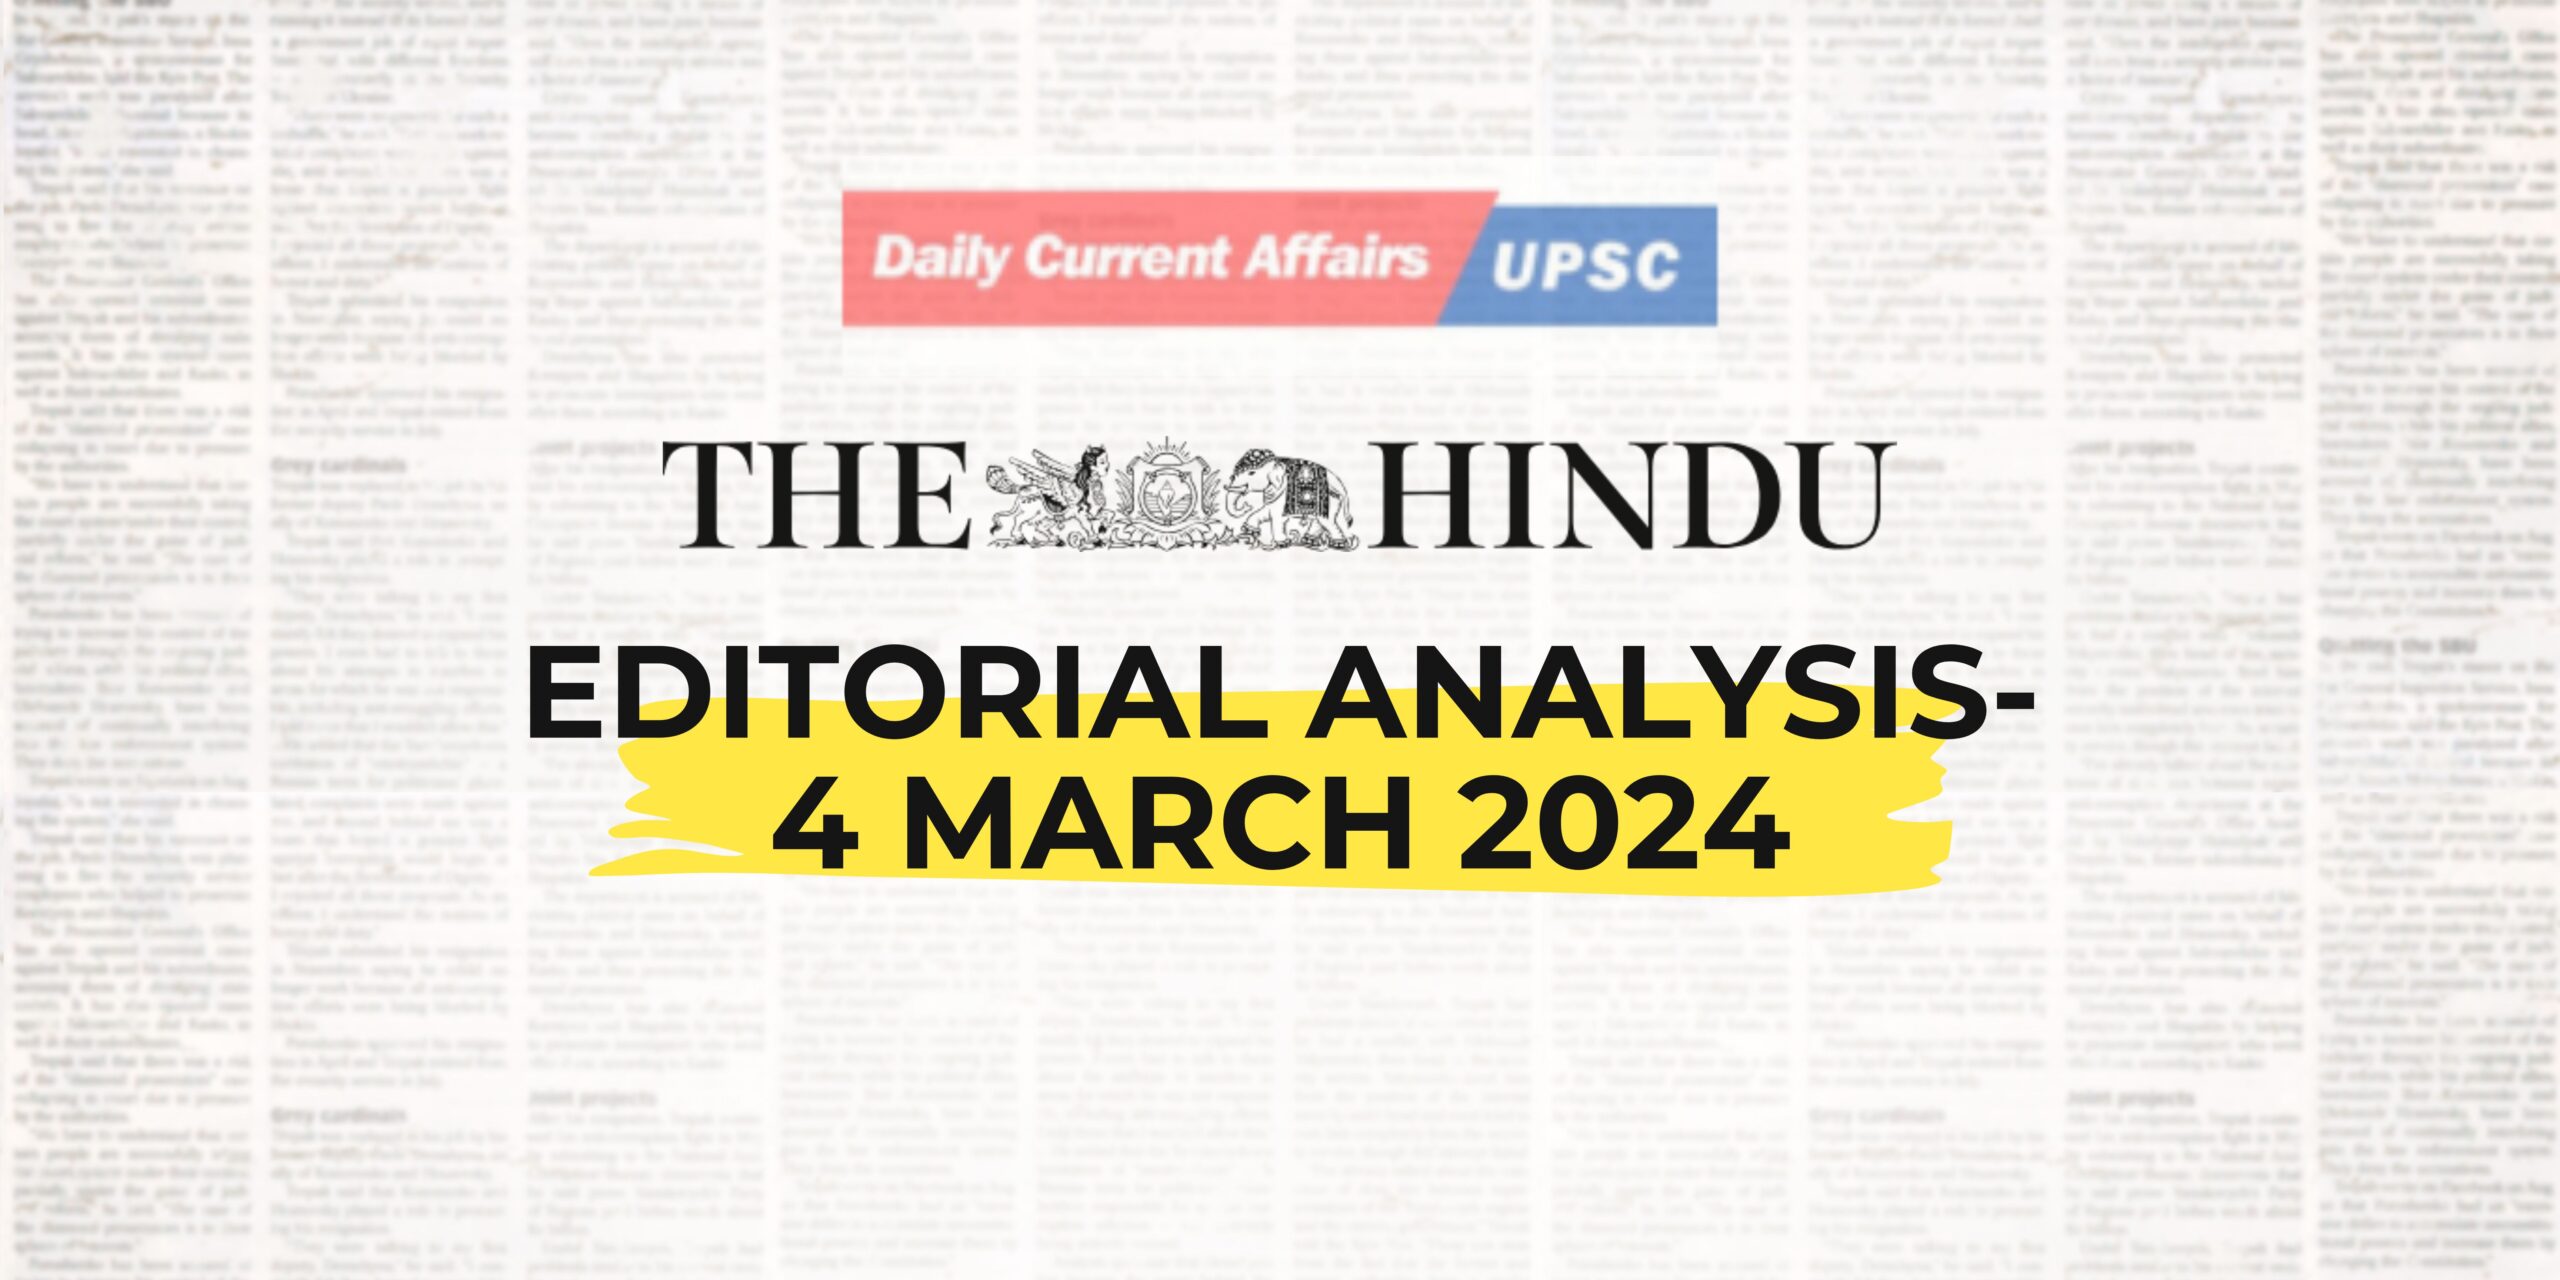 The Hindu Editorial Analysis- 4 March 2024